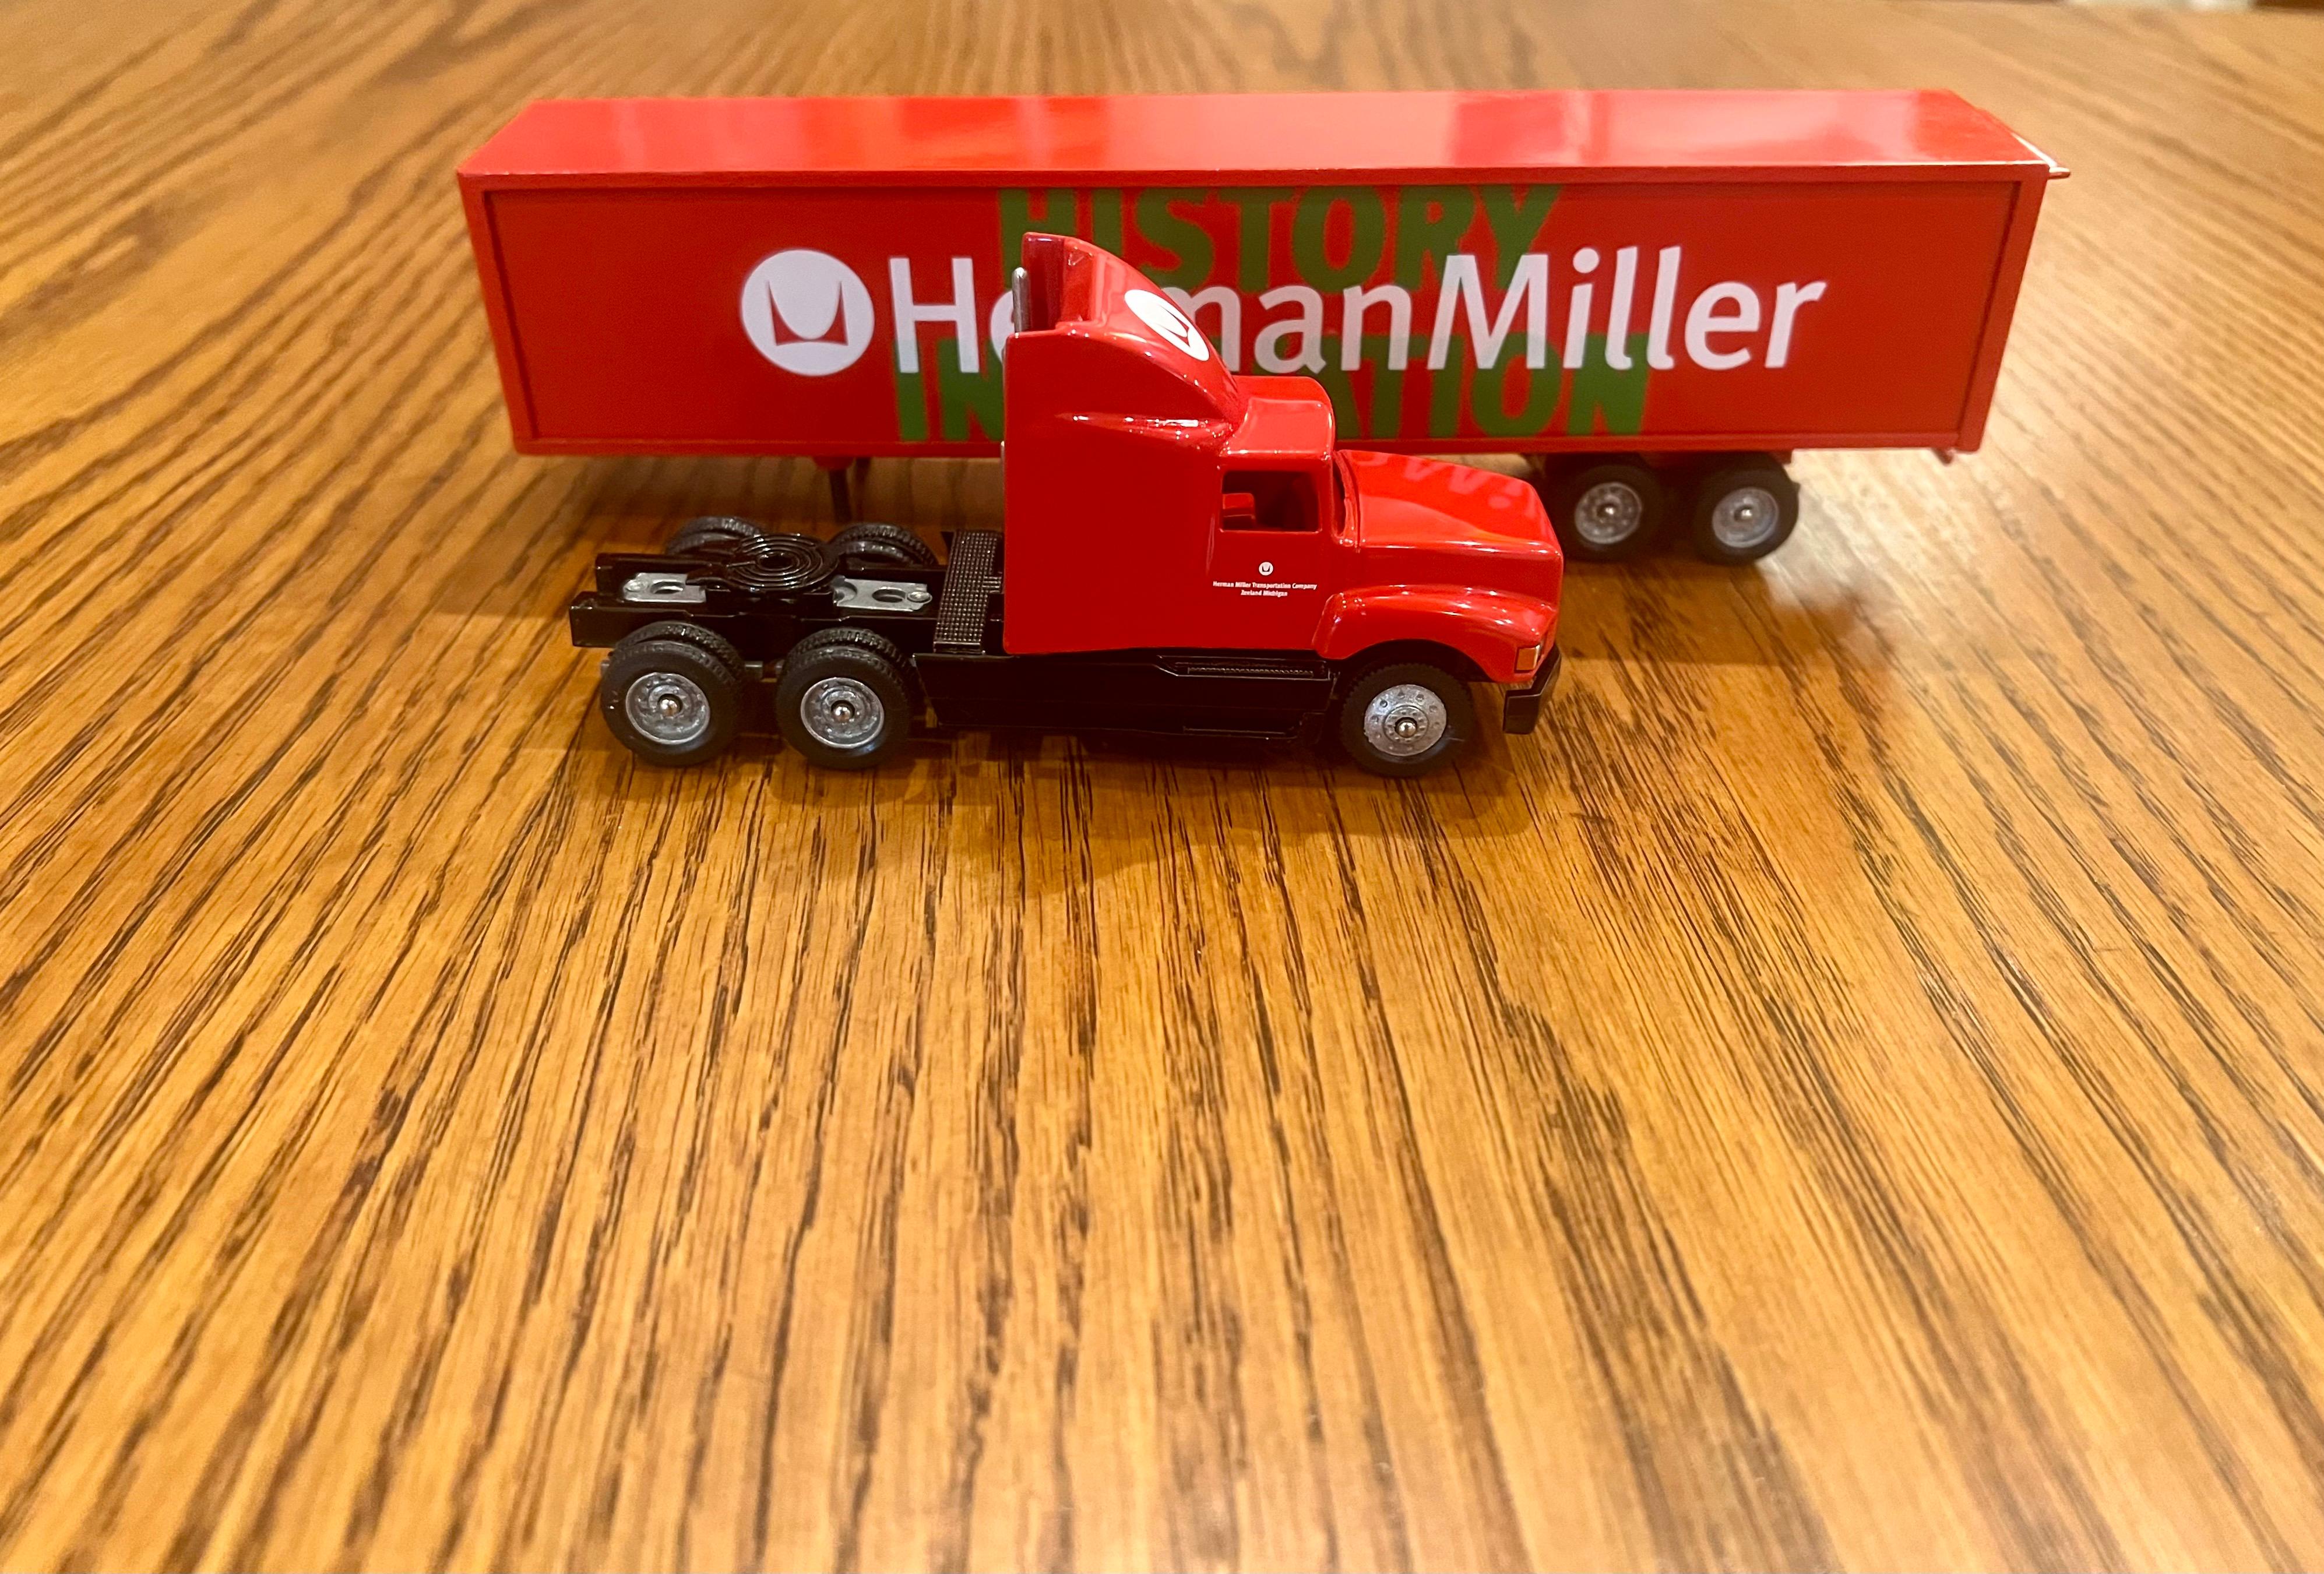 American 1980's Collectible Herman Miller Work Play Truck Original Box by Winbross USA For Sale